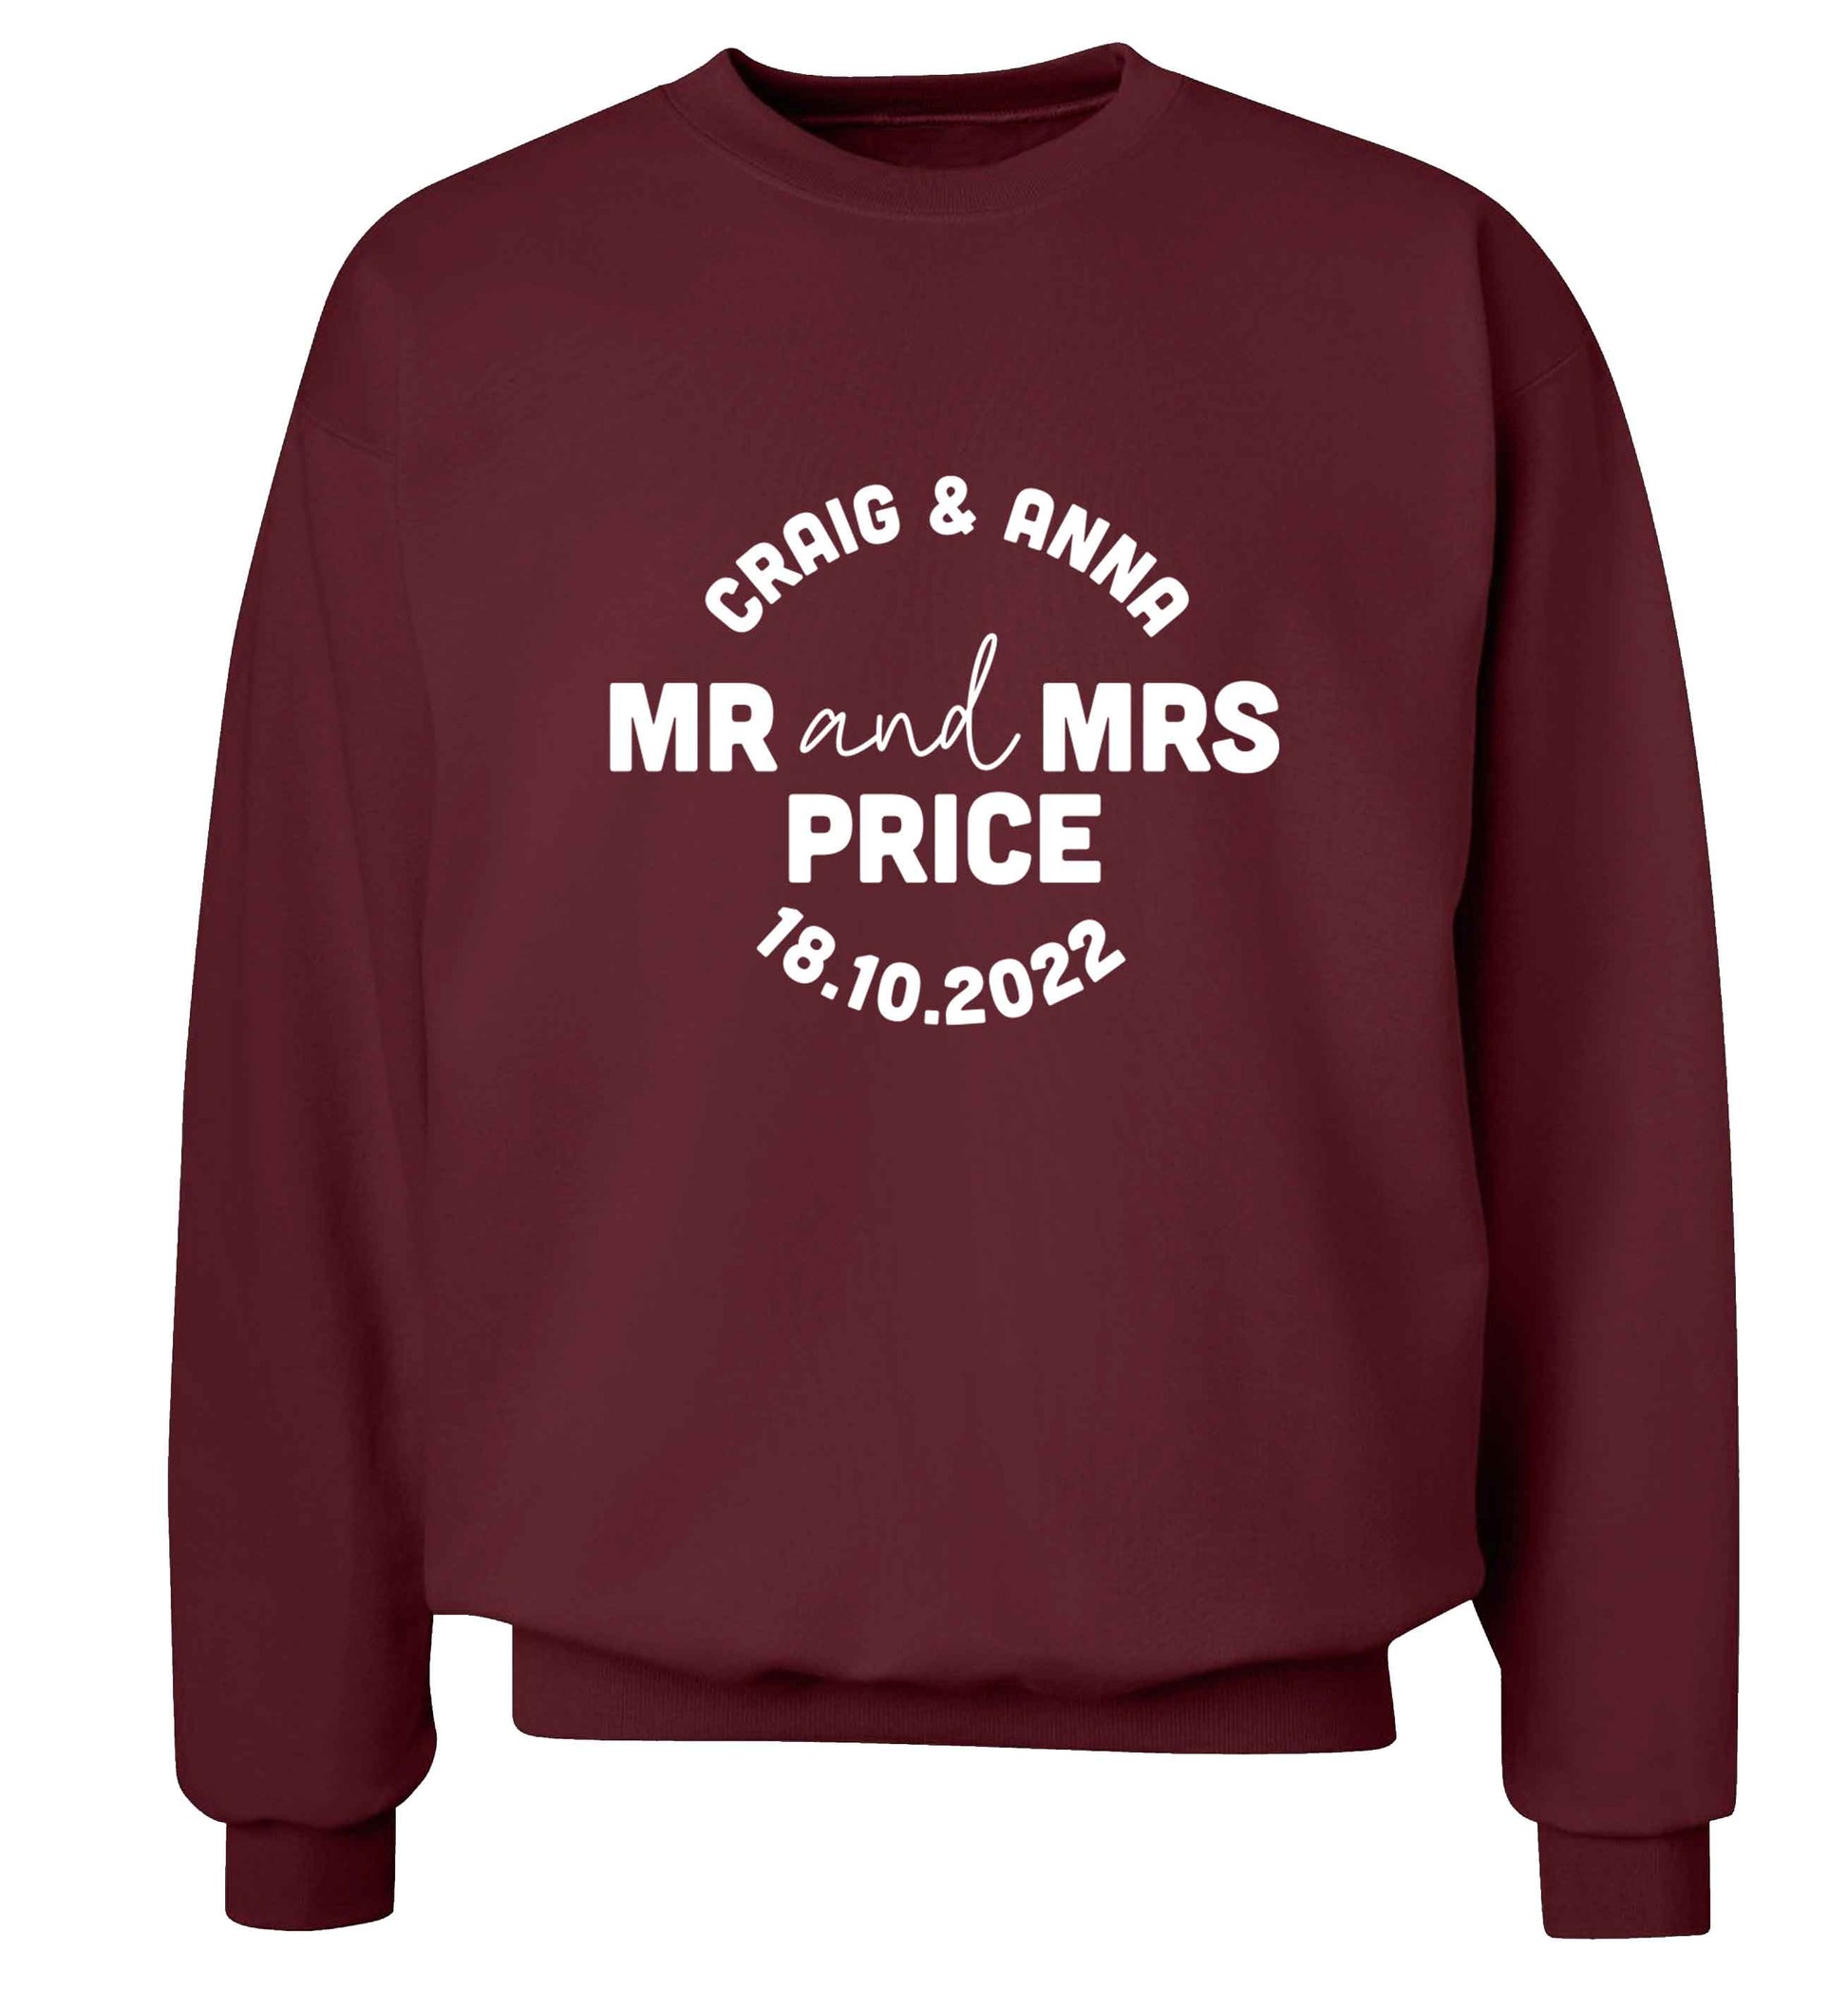 Personalised Mr and Mrs wedding and date! Ideal wedding favours! adult's unisex maroon sweater 2XL